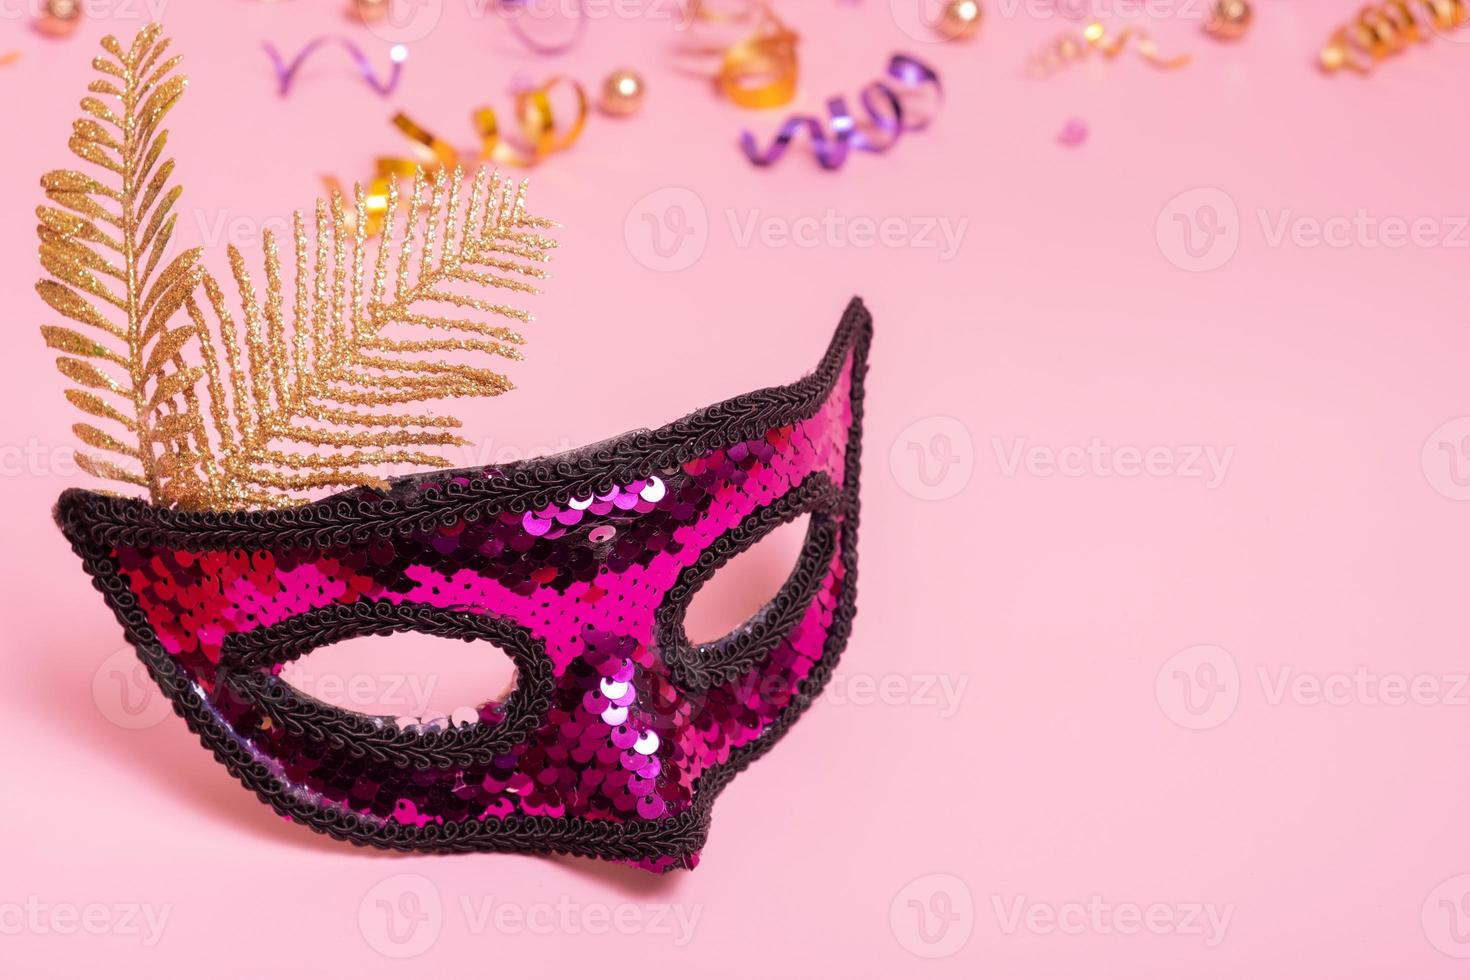 Festive face mask for masquerade or carnival celebration on pink background photo